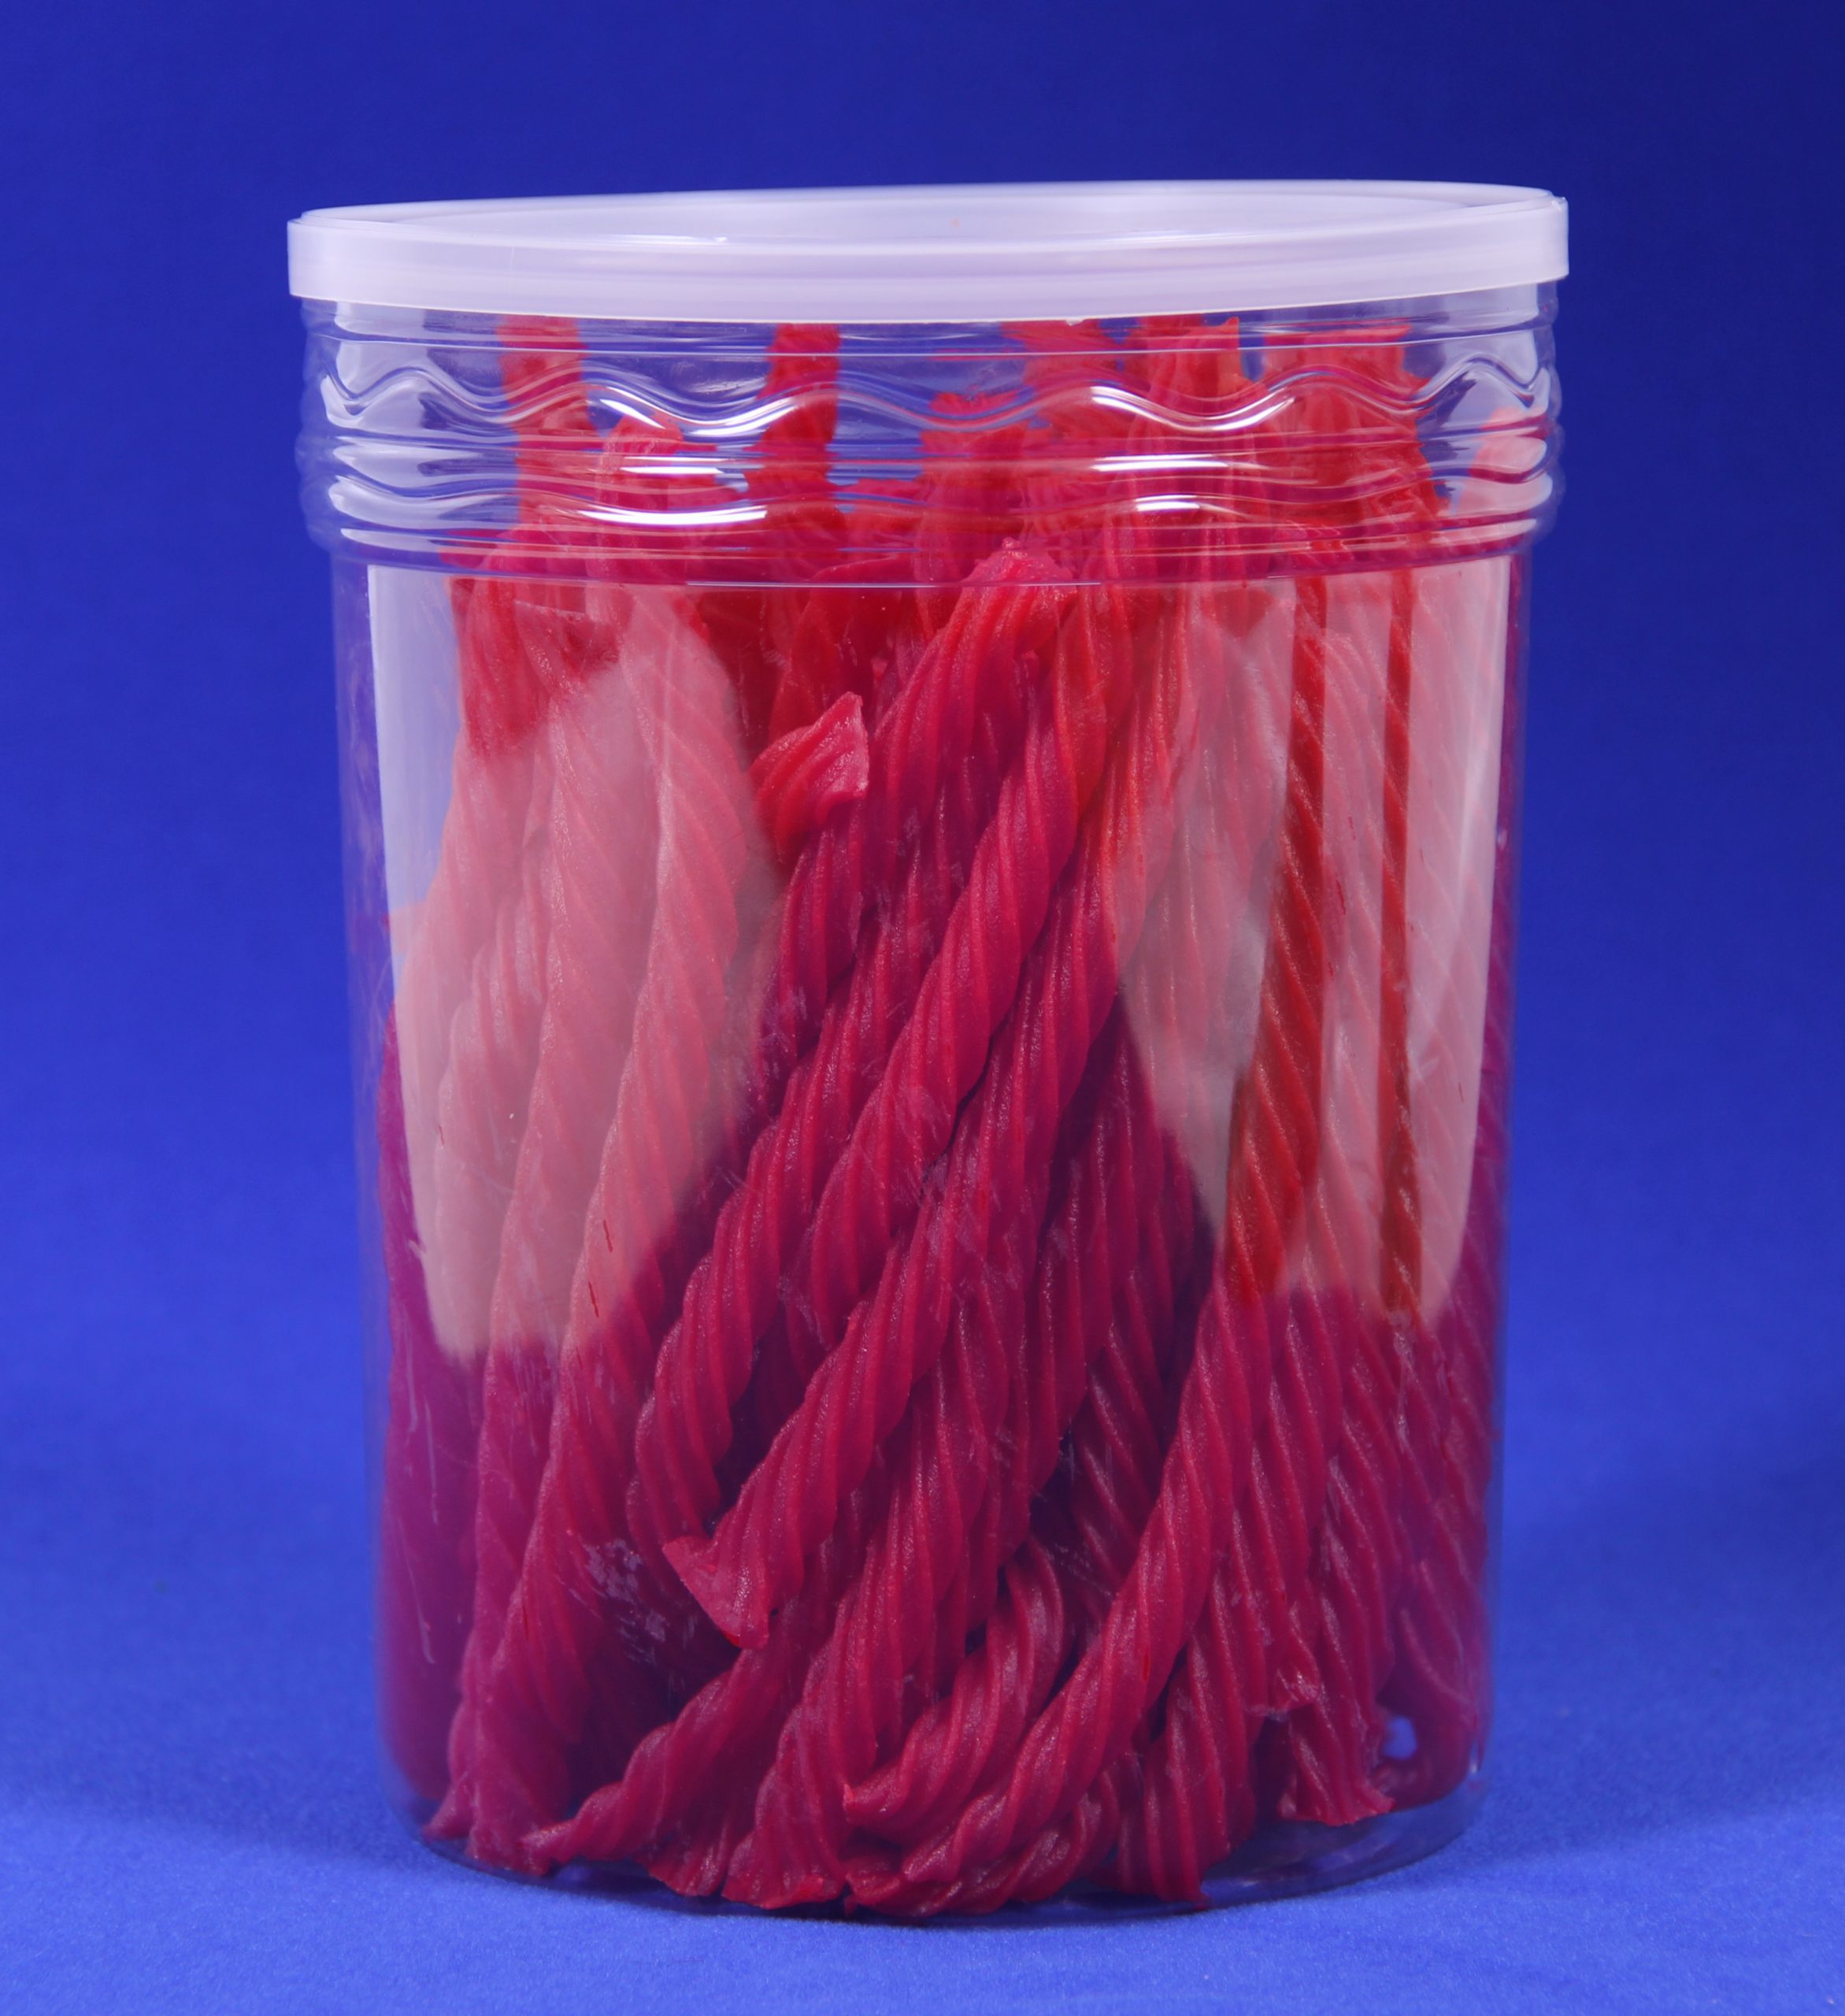 Clear Plastic Nesting Tub Container for Licorice, Pretzel Rods, Hard Candies & Chocolates